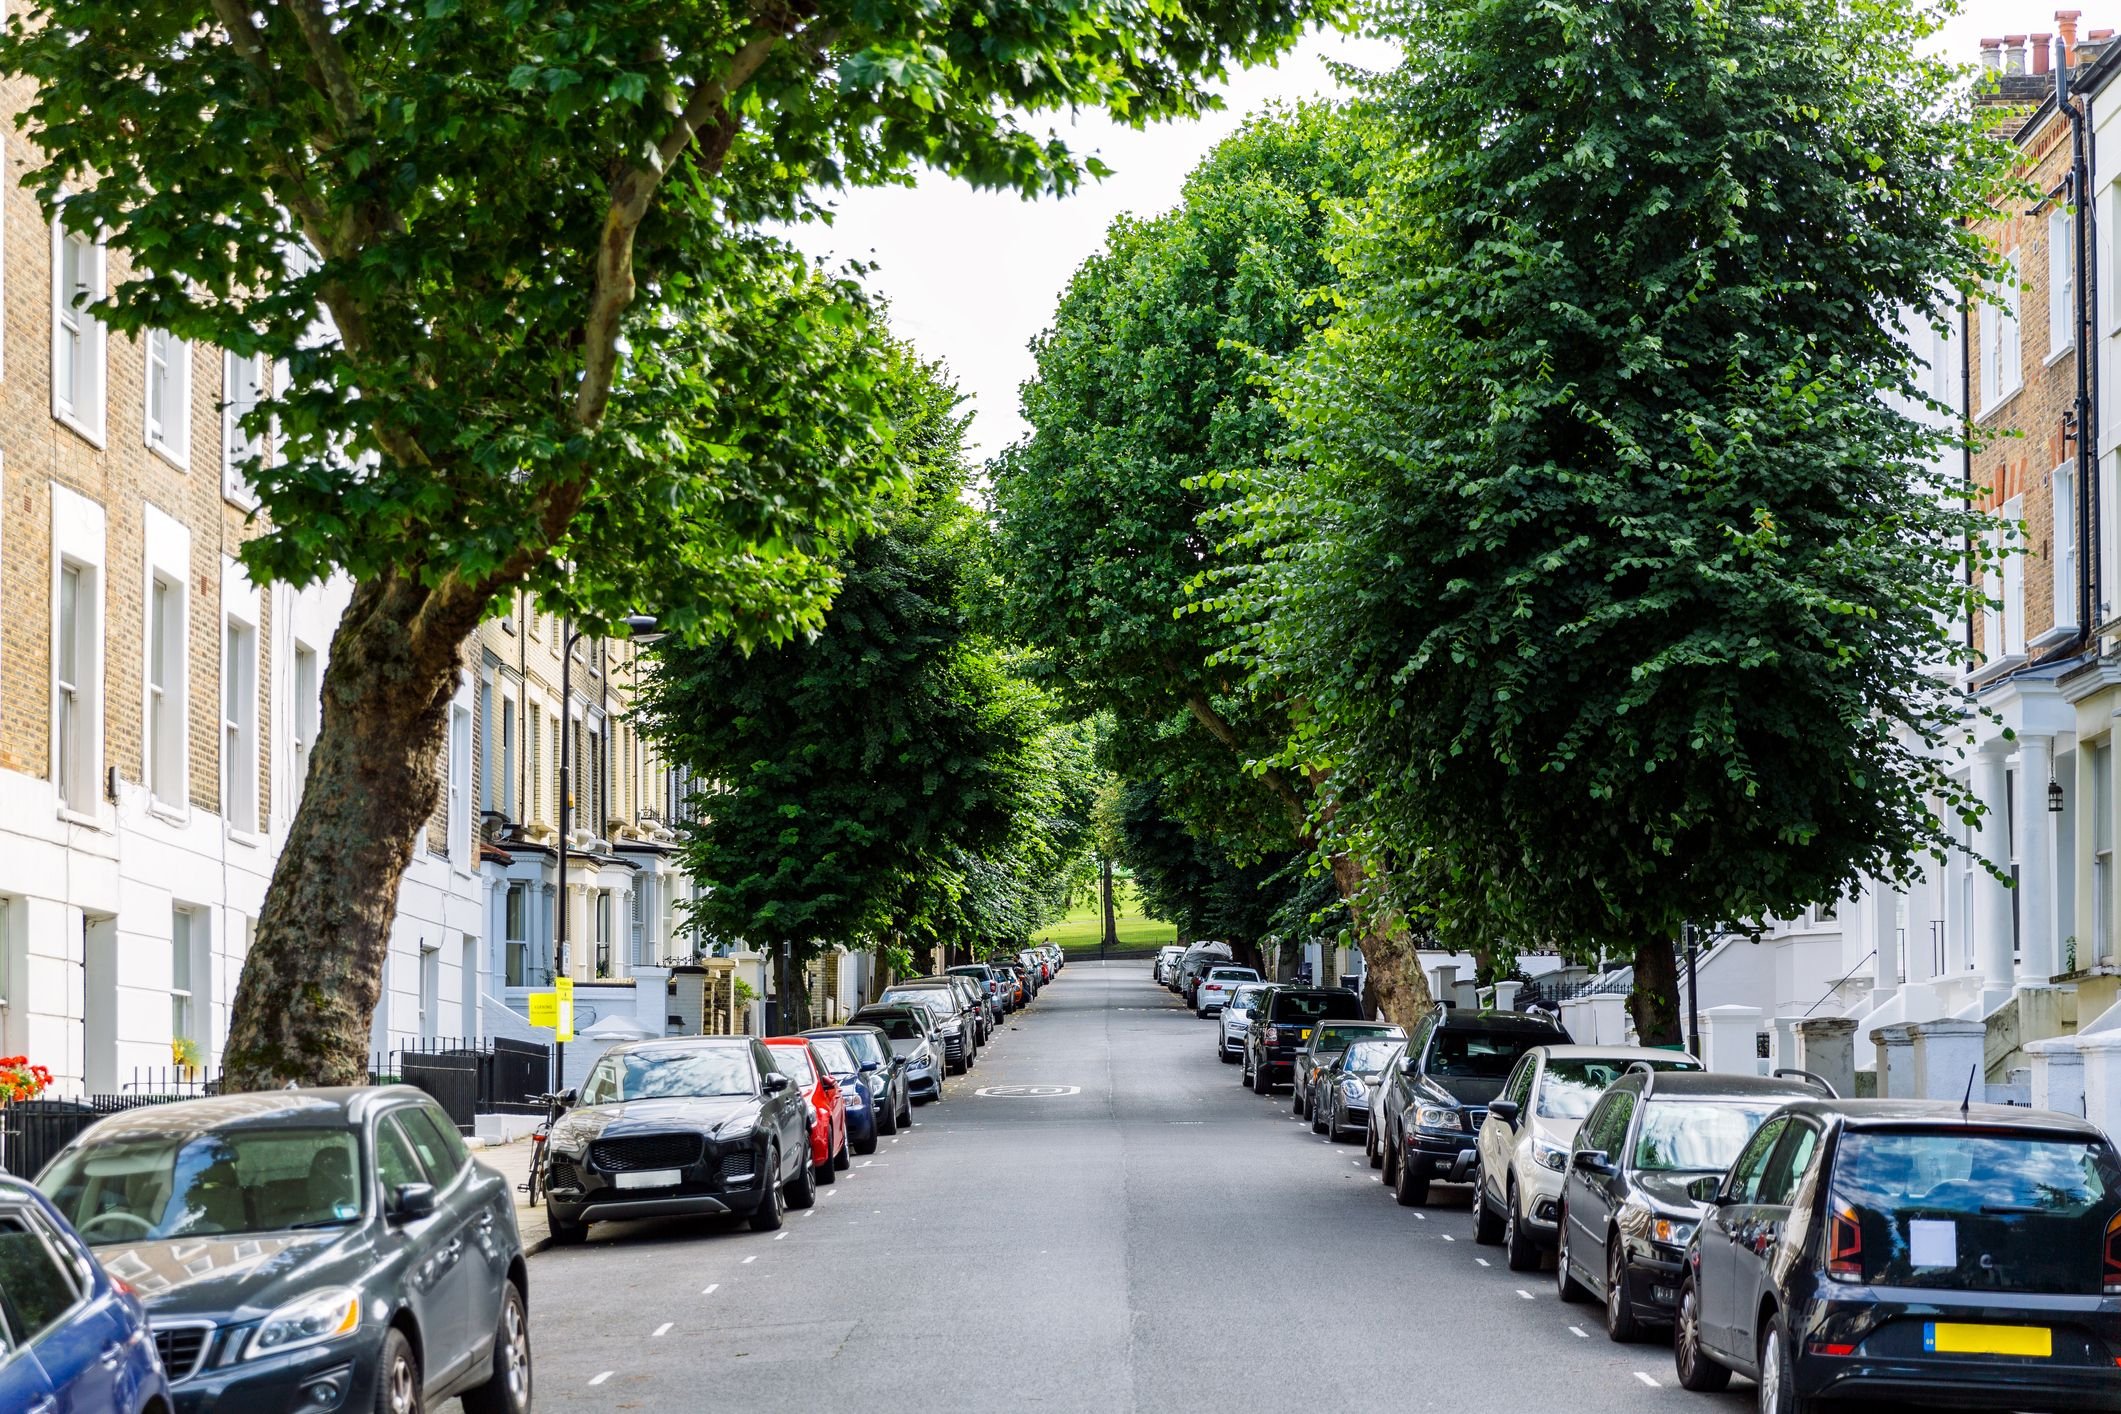 Cars lined outside the street. | Source: Shutterstock